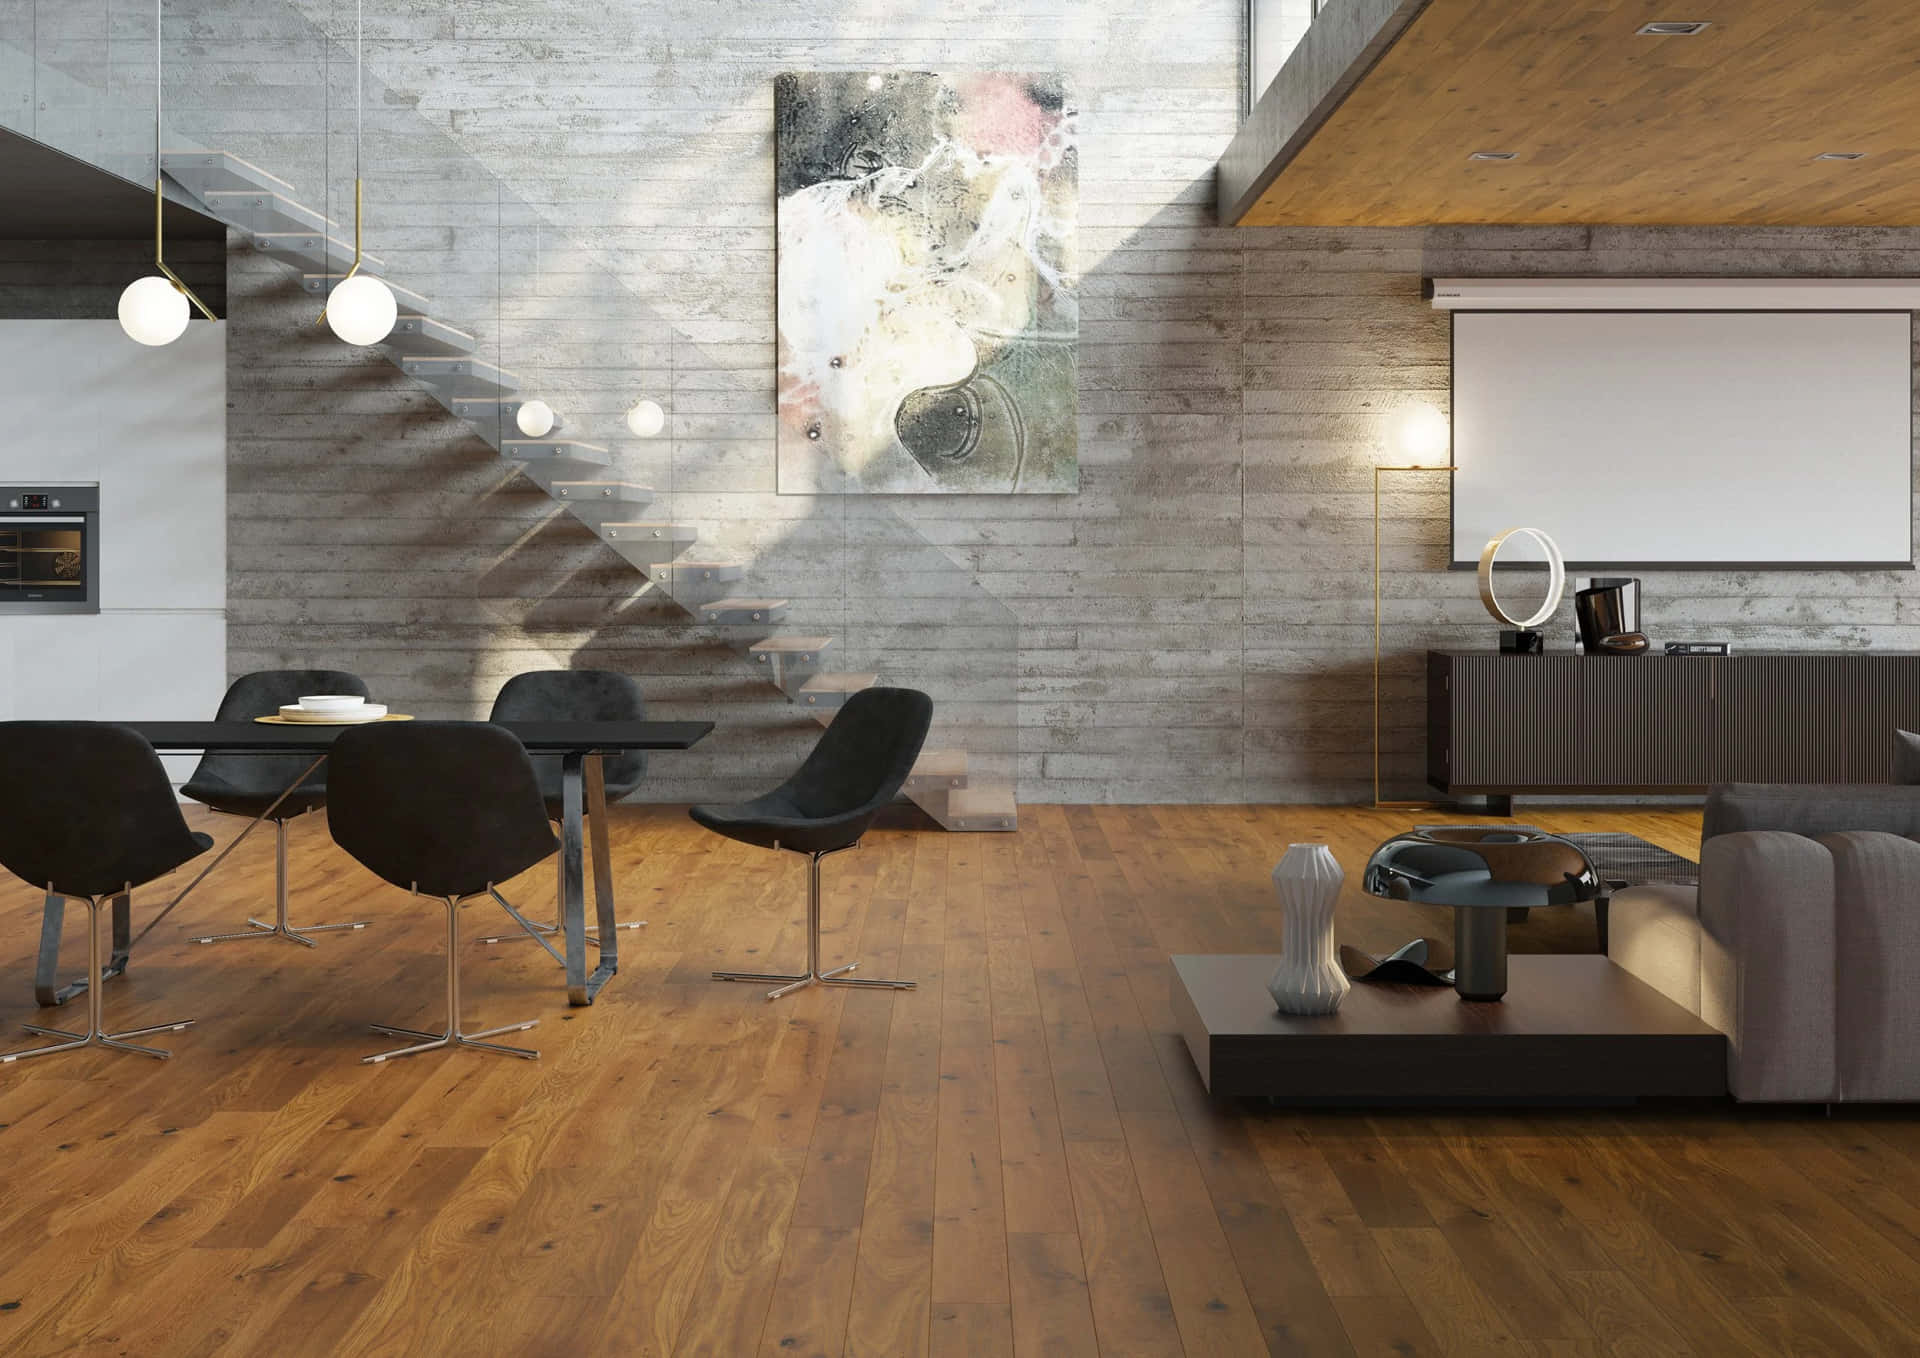 The beauty of natural hardwood flooring